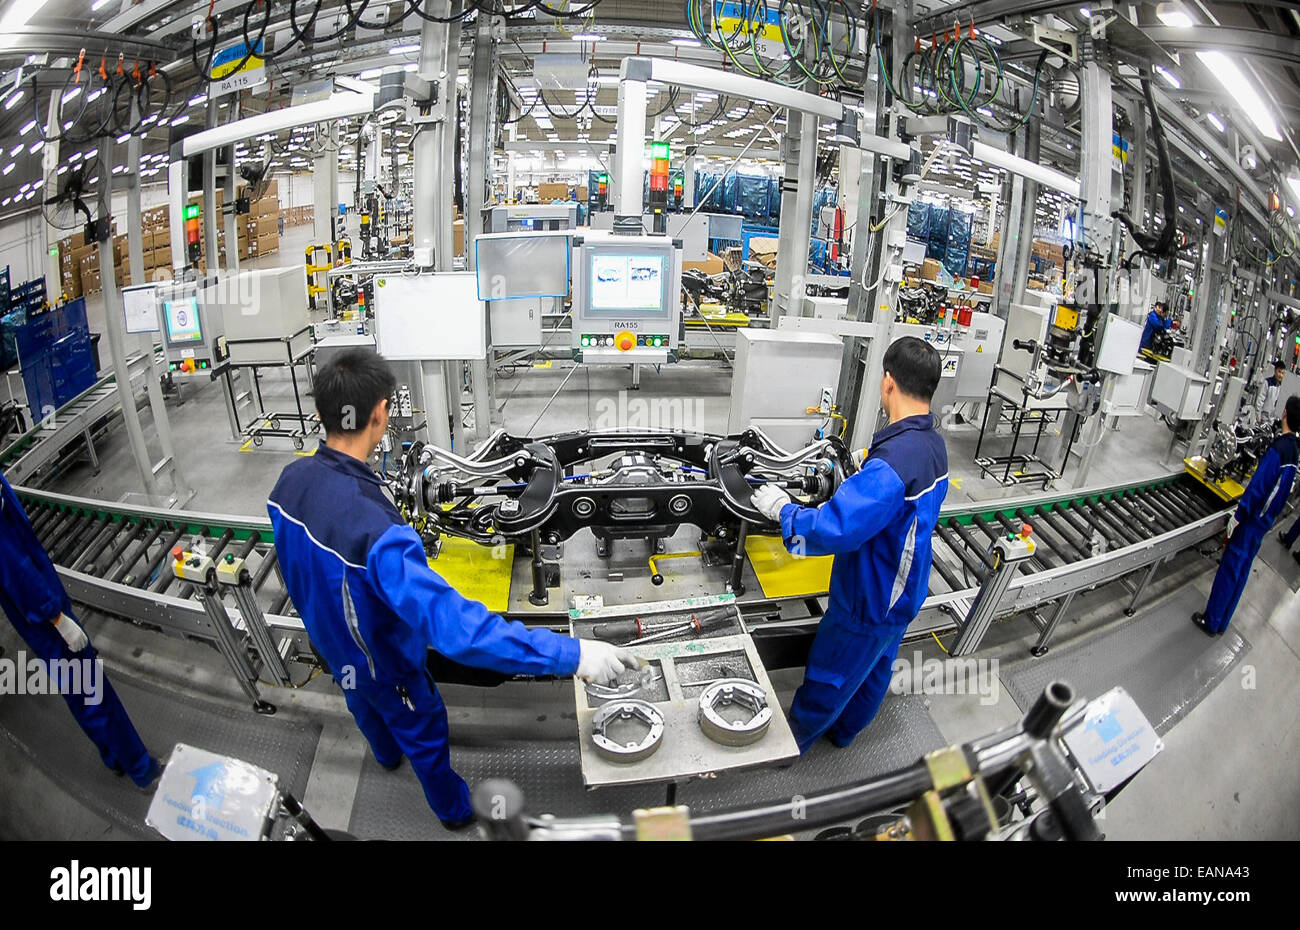 Workers assemble undercarriage components on a front wheel axle for Mercedes in the ZF Chassis Systems factory in Peking, China, 14 November 2014. At the automotive supply factory, axles for Merecedes C- and E-Class cars are assembled. Members of Lower Saxon Premier Weil's economic delegation visited the factory in Peking. Weil traveled through China with representatives from the economy, science, and politics  from 09-15 November 2014. Photo: Ole Spata/dpa Stock Photo